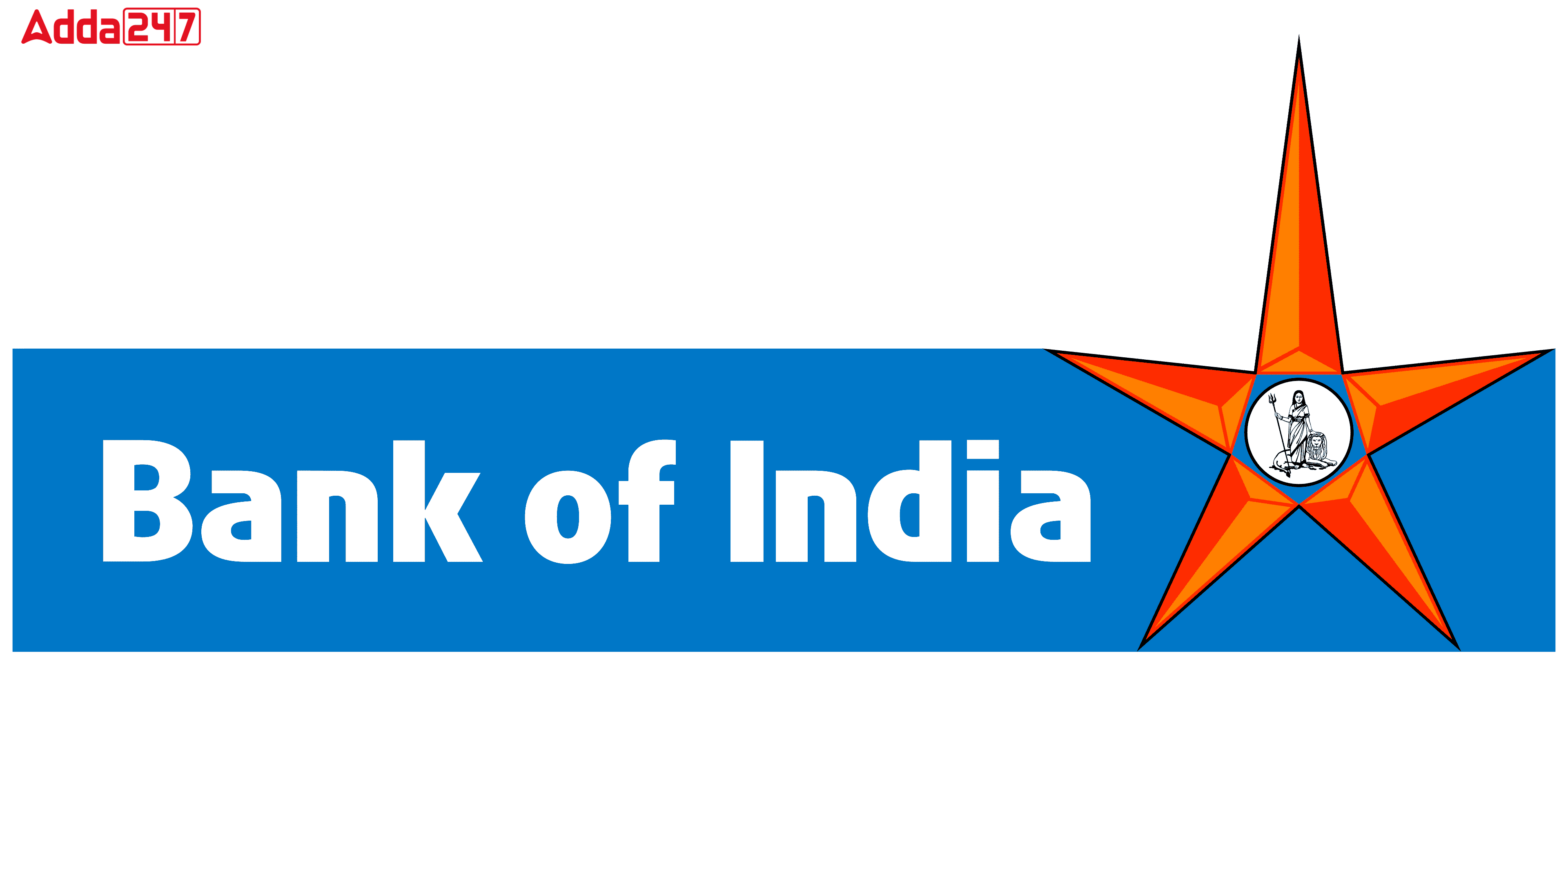 Income Tax Department Imposes ₹564.44 Crore Penalty on Bank of India